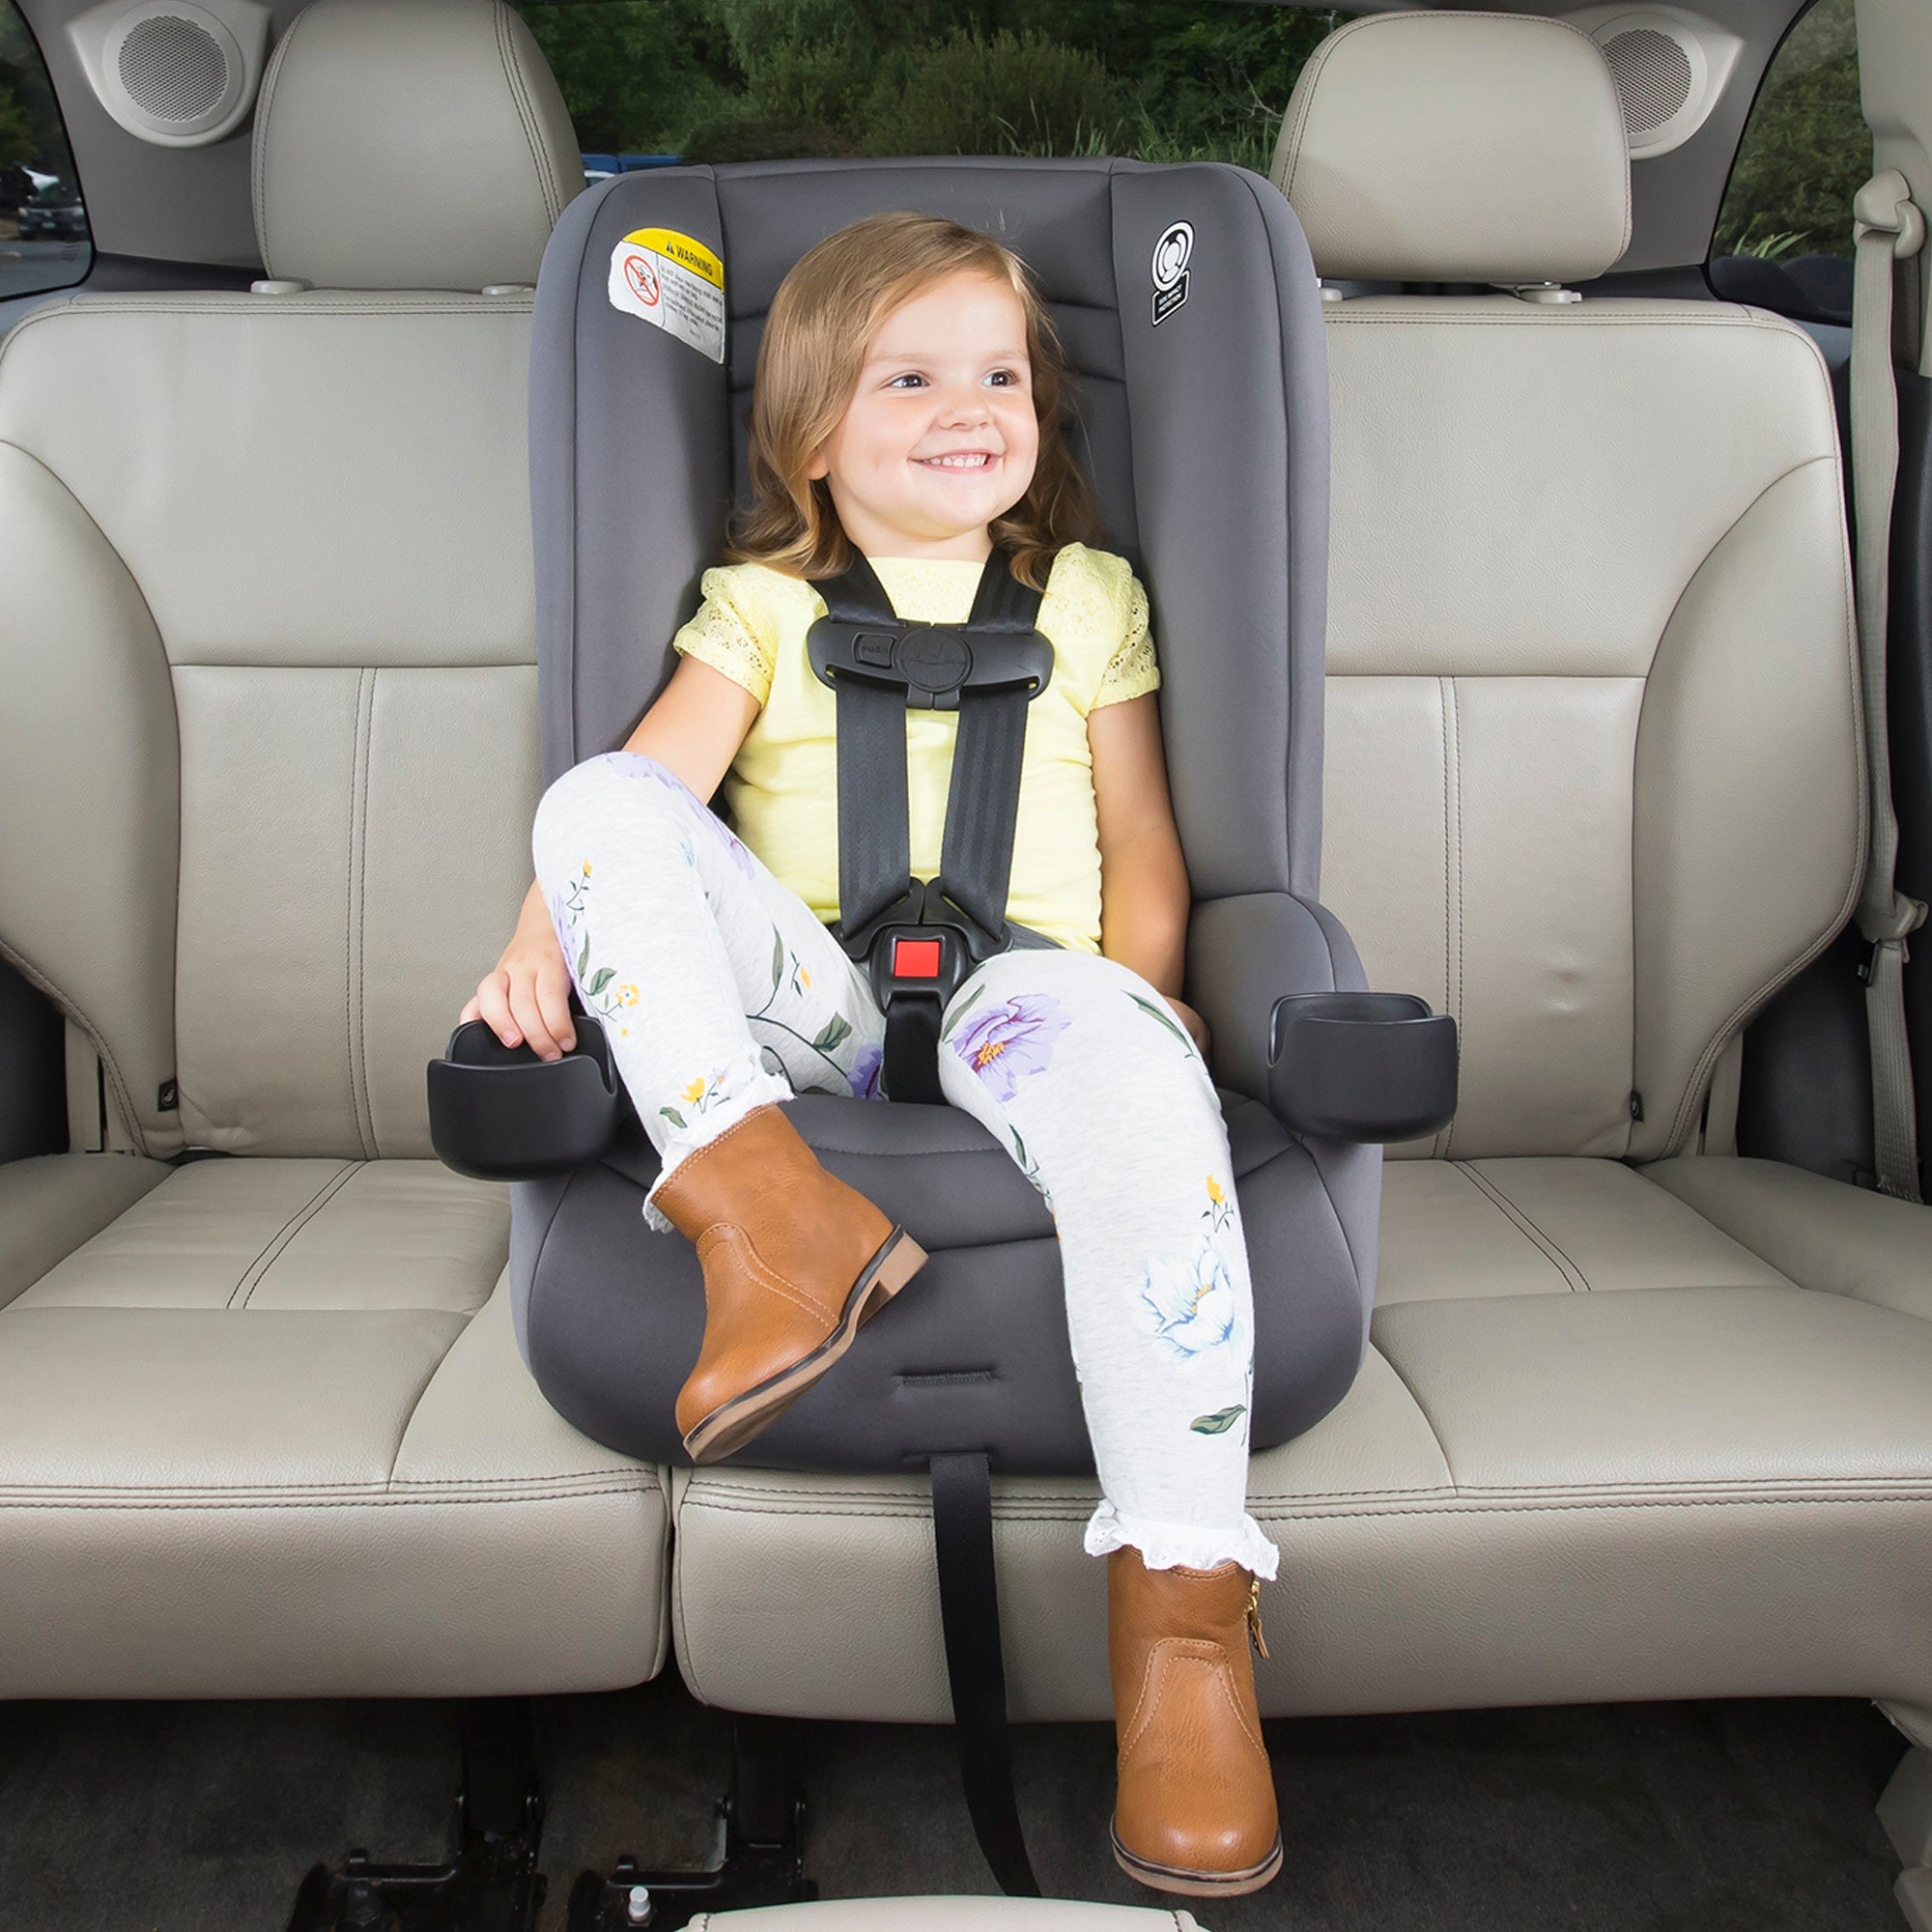 toddler in yellow shirt sitting in convertible car seat in car middle seat